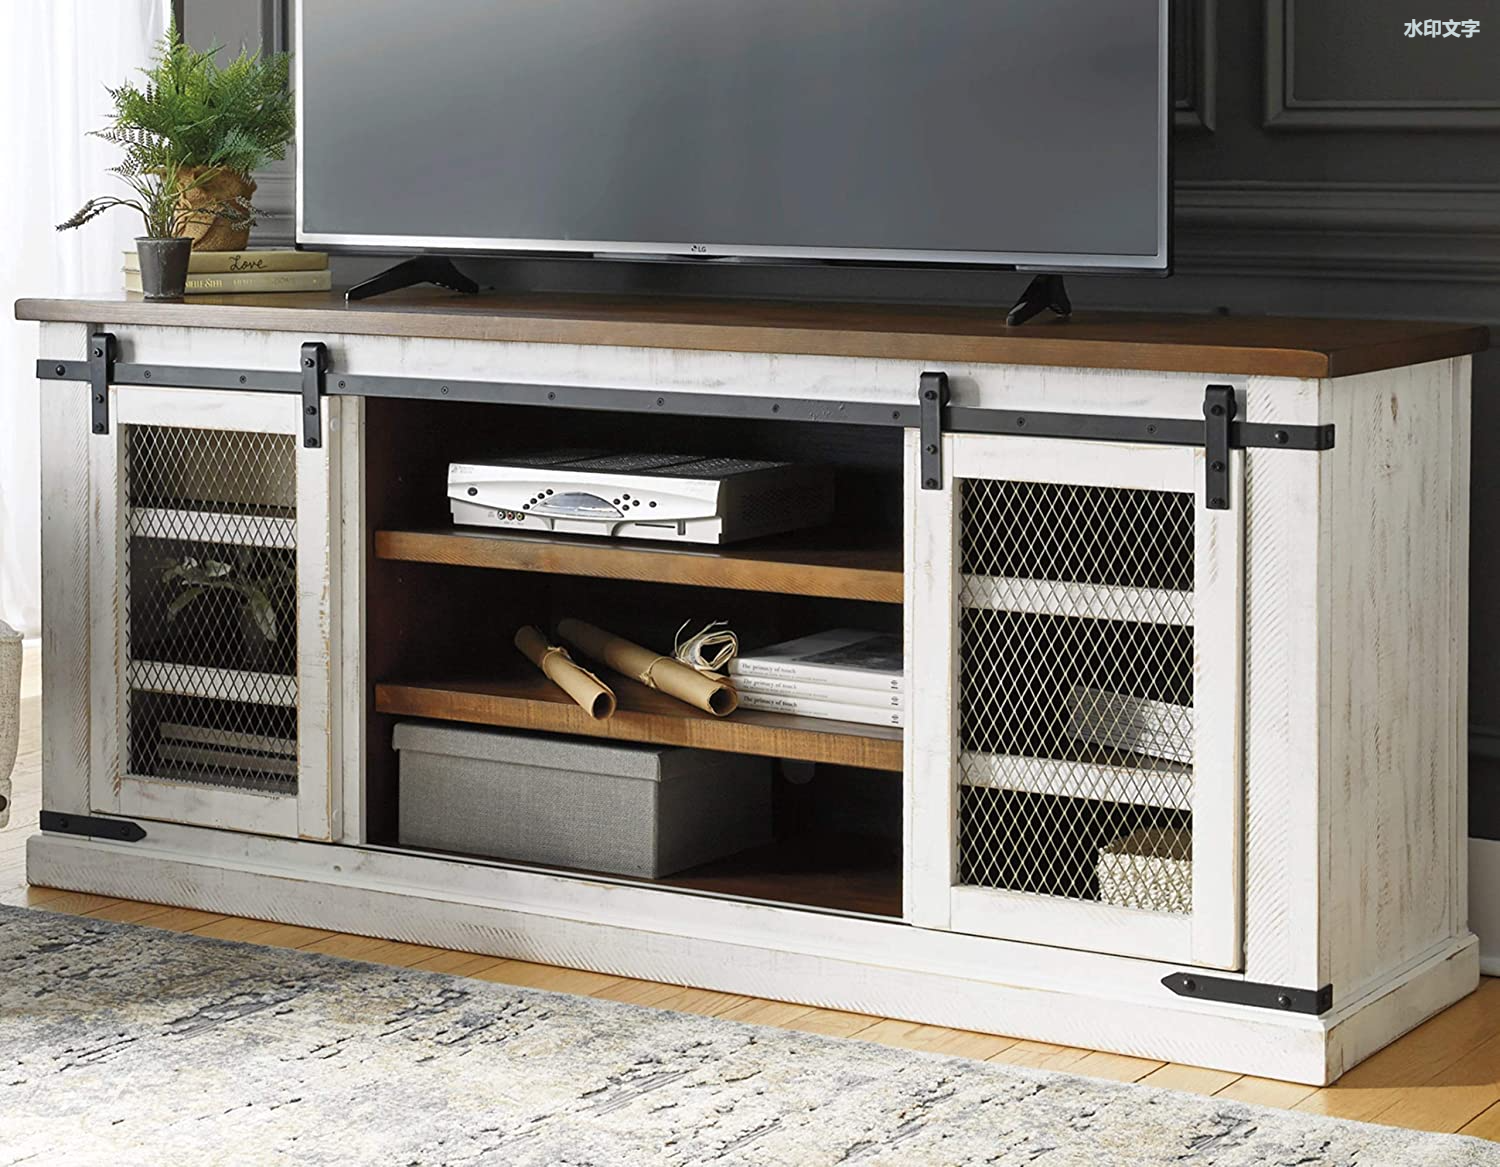 Farmhouse TV Stand Fits TVs up to 68", 2 Sliding Barn Doors and 6 Storage Shelves, White & Brown with Distressed Finish